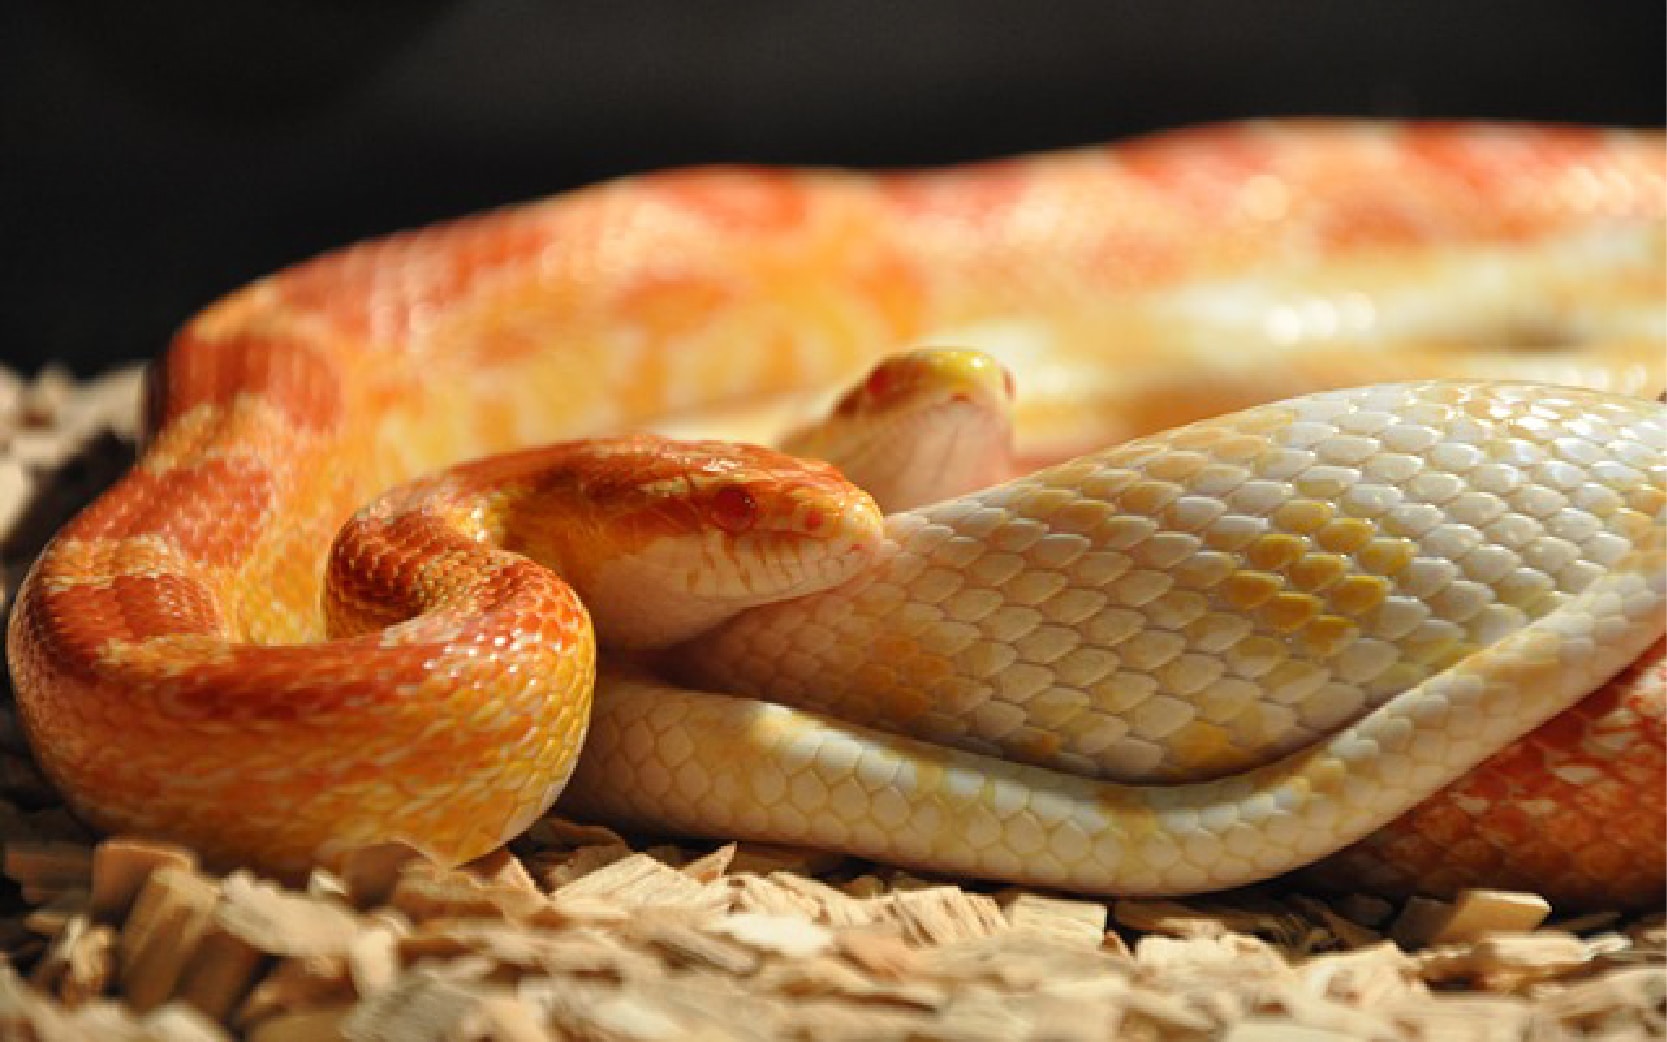 16 Popular Types Of Pet Snakes With Pictures Reptile Advisor,Picture Of A Rattle